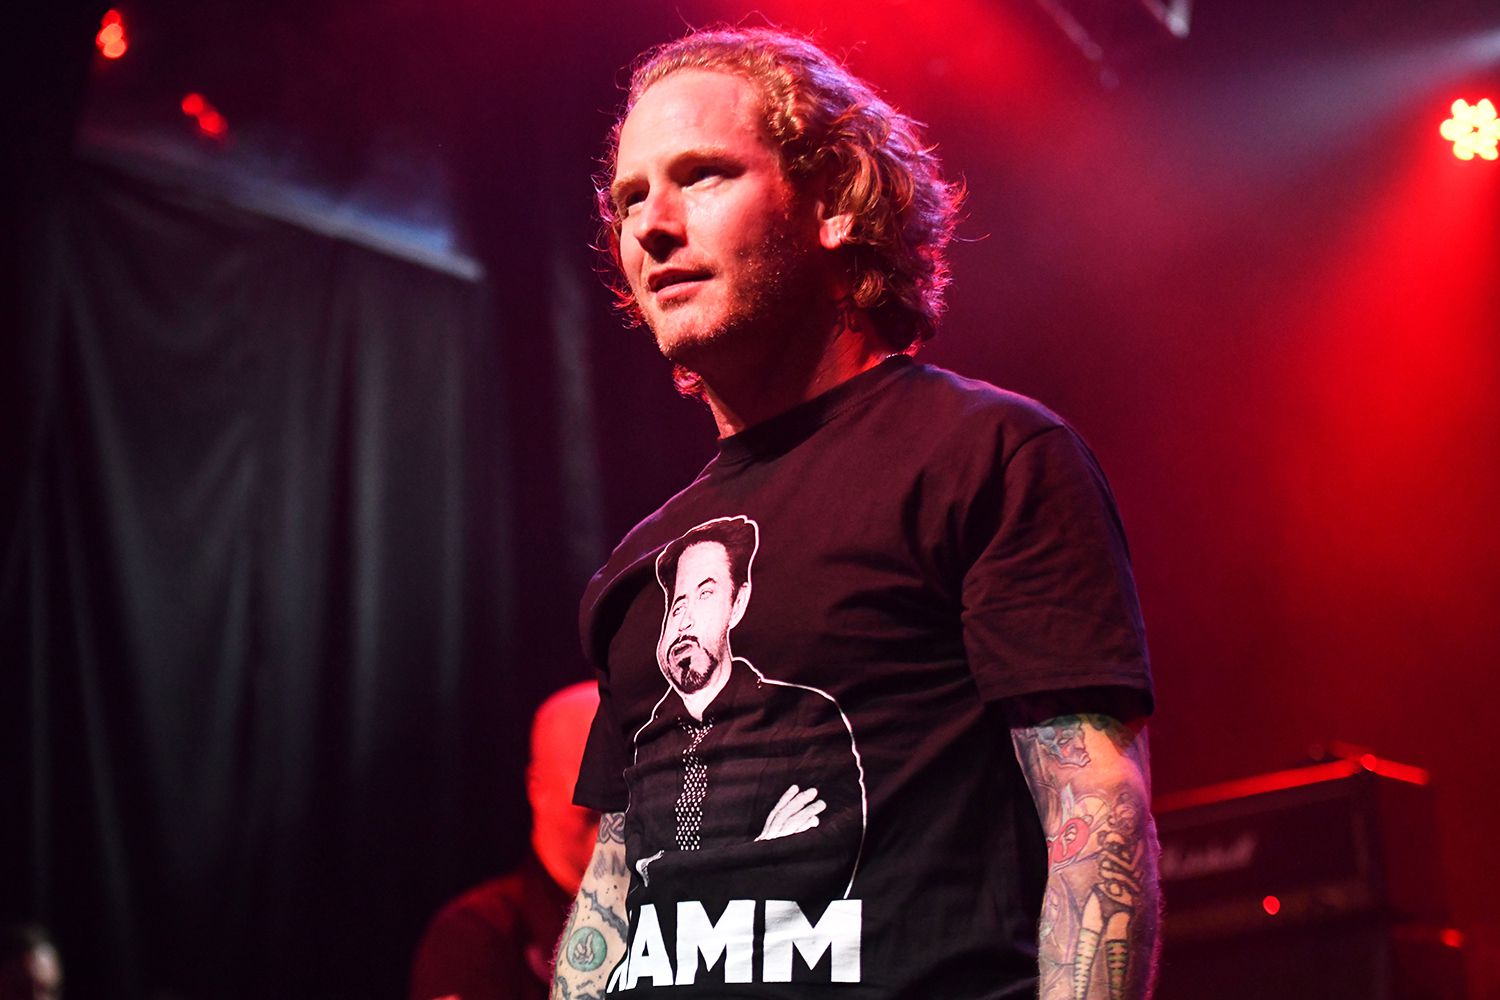 Corey Taylor of Slipknot and Stone Sour performs onstage during DIMEBASH 2019 at The Observatory on January 24, 2019 in Santa Ana, California.